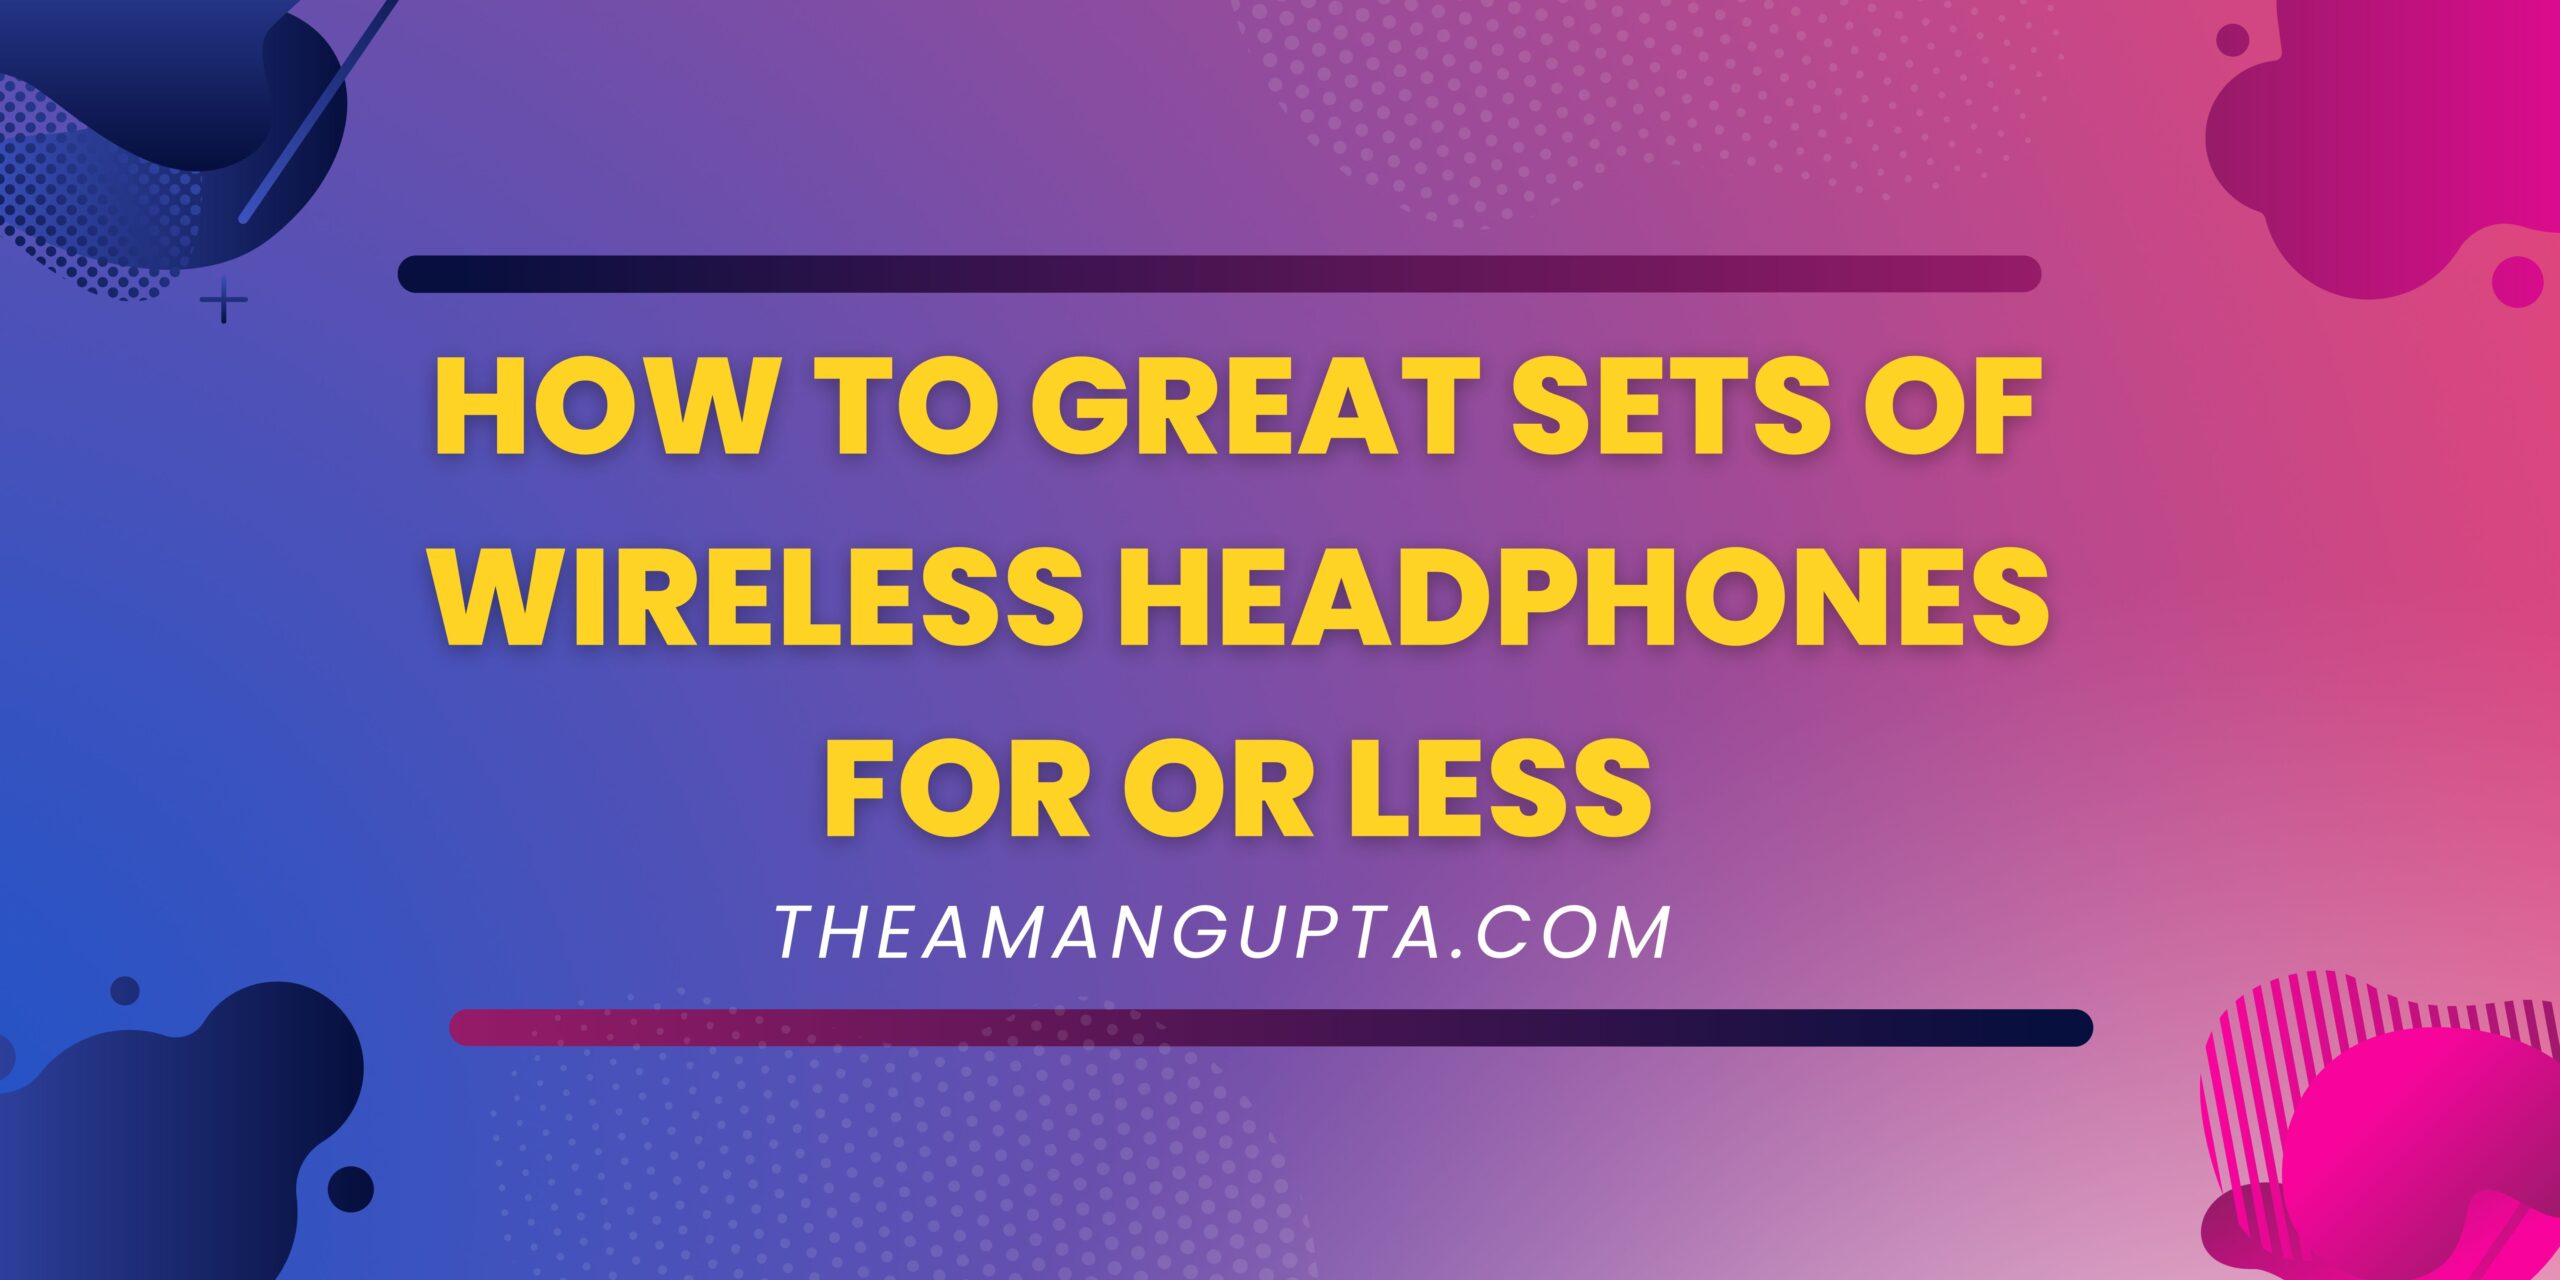 How To Great Sets of Wireless Headsets for or Less|Headsets|Theamangupta|Theamangupta